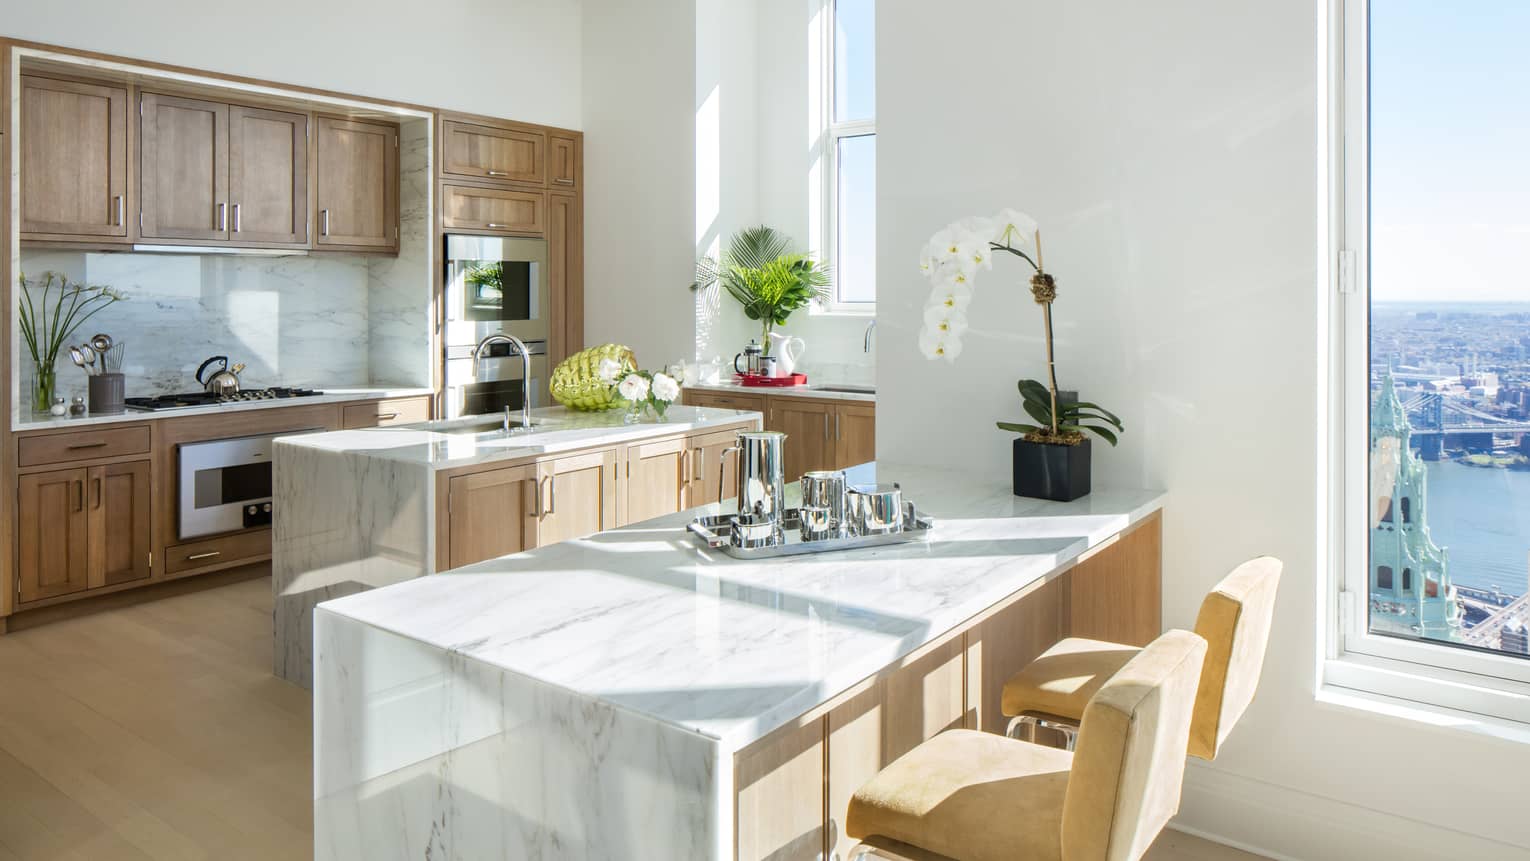 Kitchen island with Colorado White marble countertops and stools, solid oak cabinets, fresh white orchids